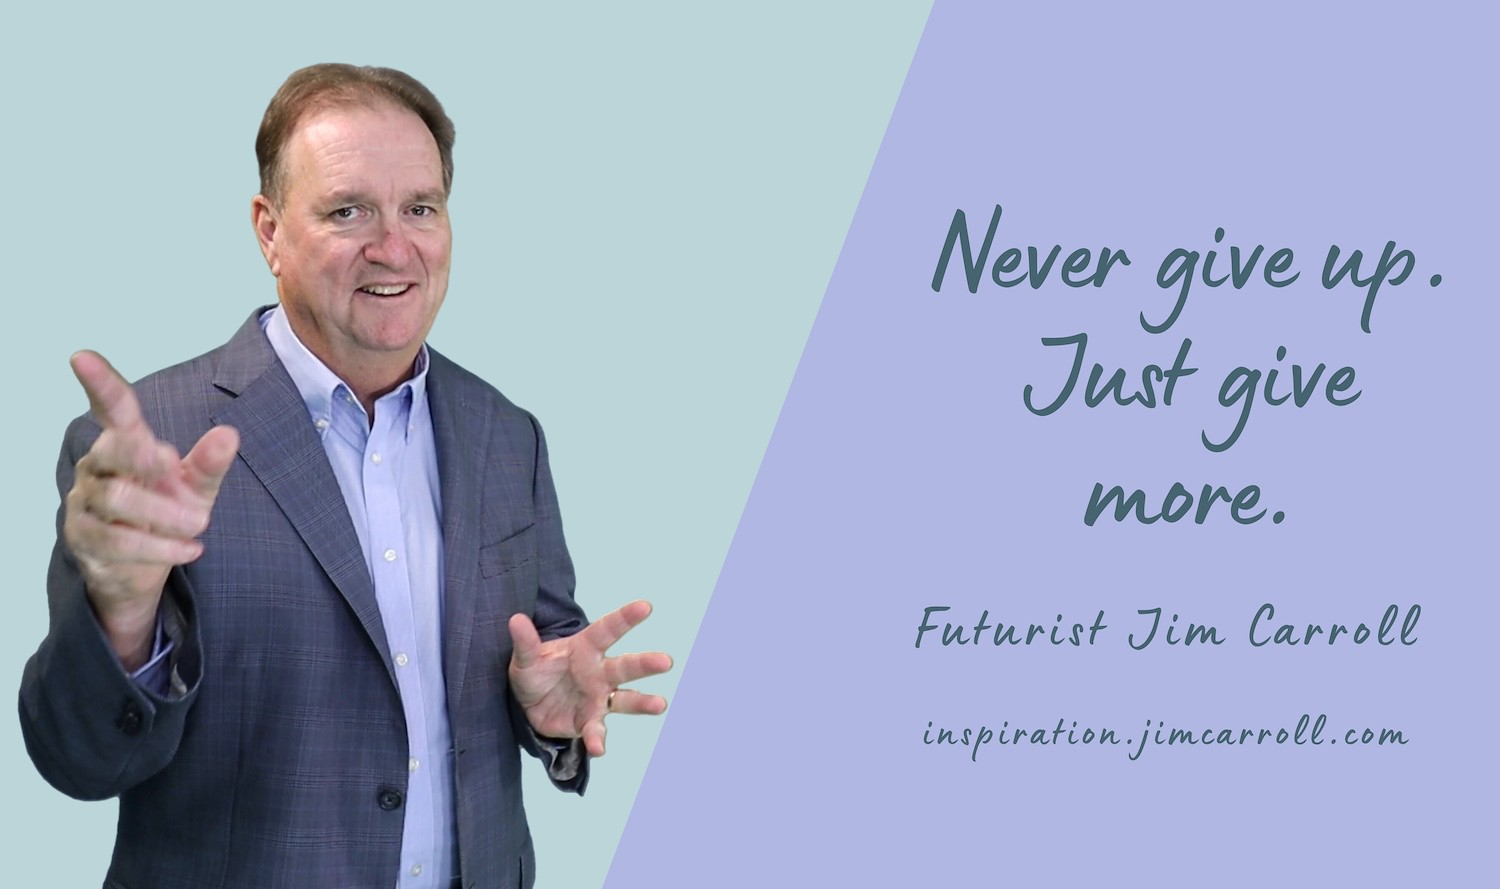 "Never give up. Just give more." - Futurist Jim Carroll